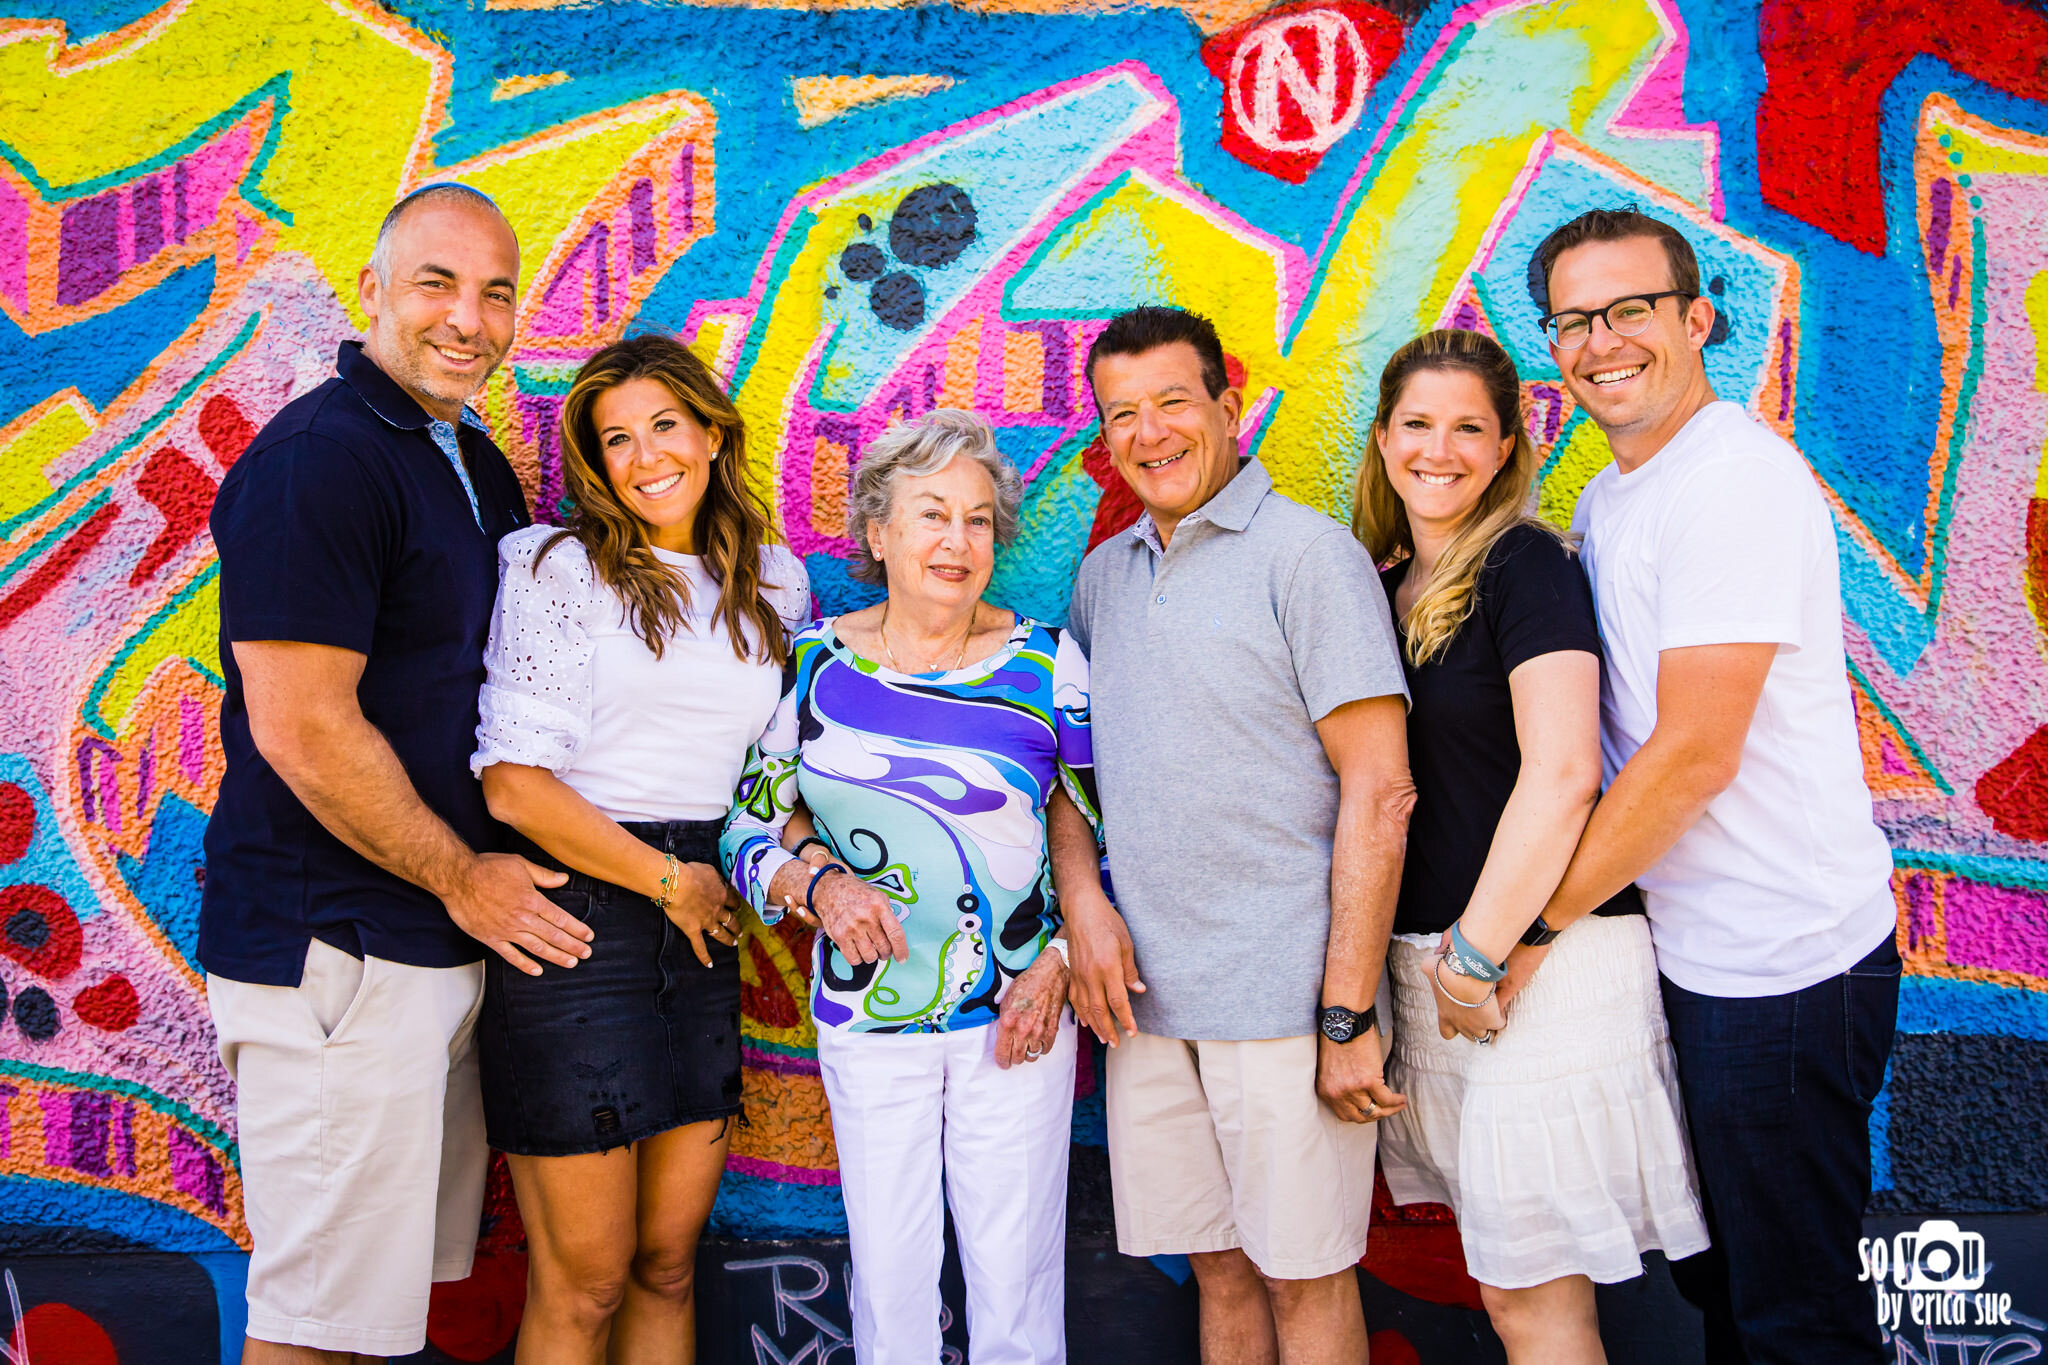 7-so-you-by-erica-sue-extended-family-session-wynwood-lifestyle-photographer-CD8A7053.jpg